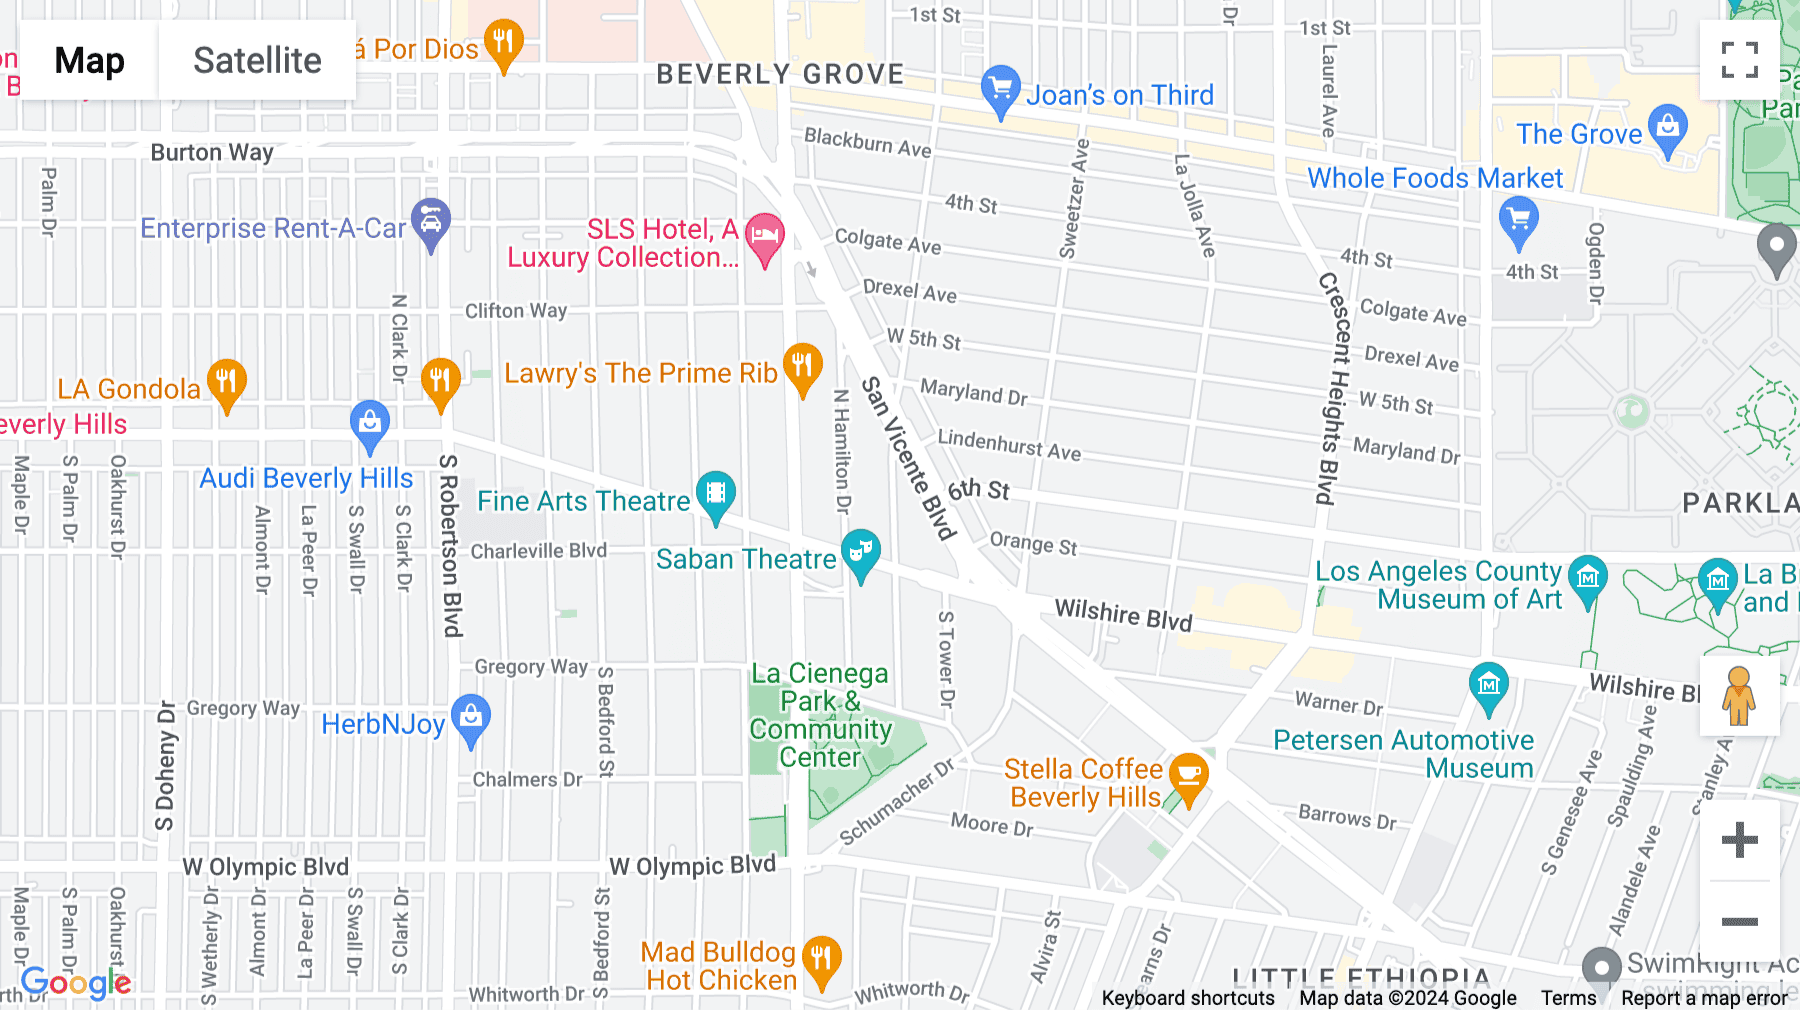 Click for interative map of 113 N San Vicente Boulevard, 2nd Floor, Los Angeles, California, USA, Los Angeles